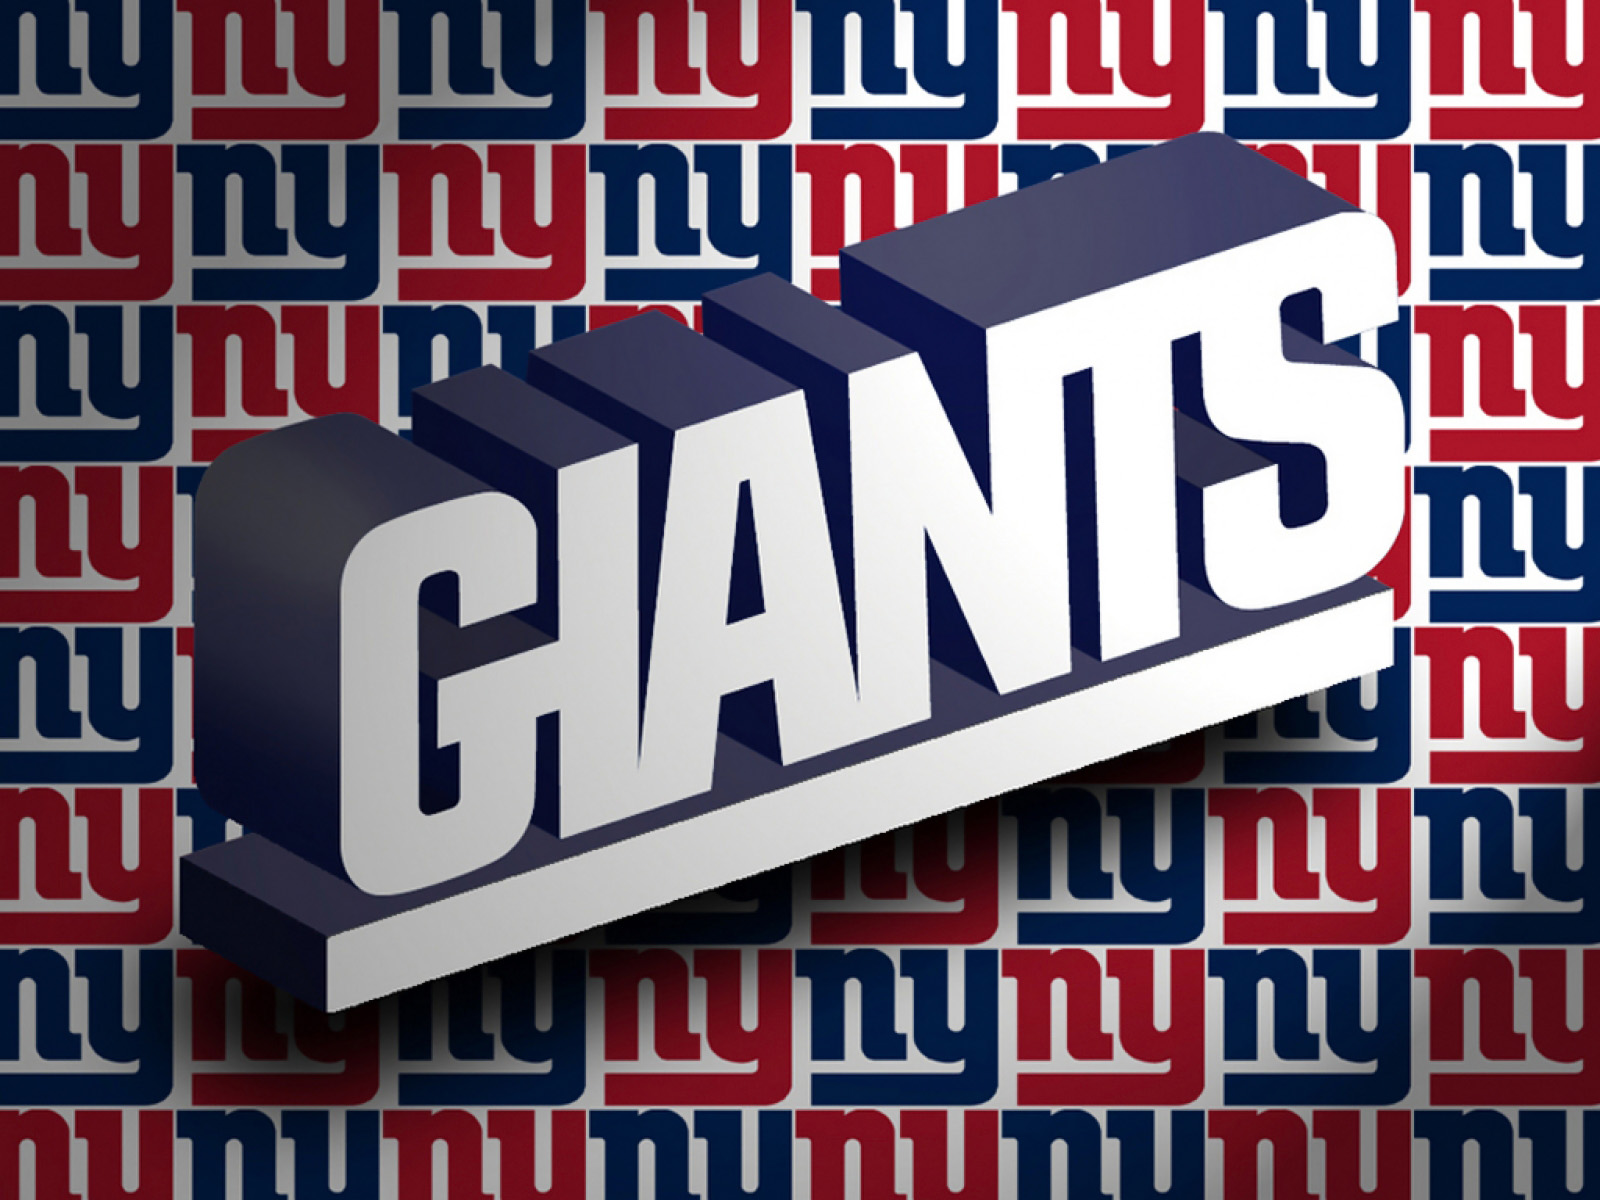 New York Giants 3d Letters Photo